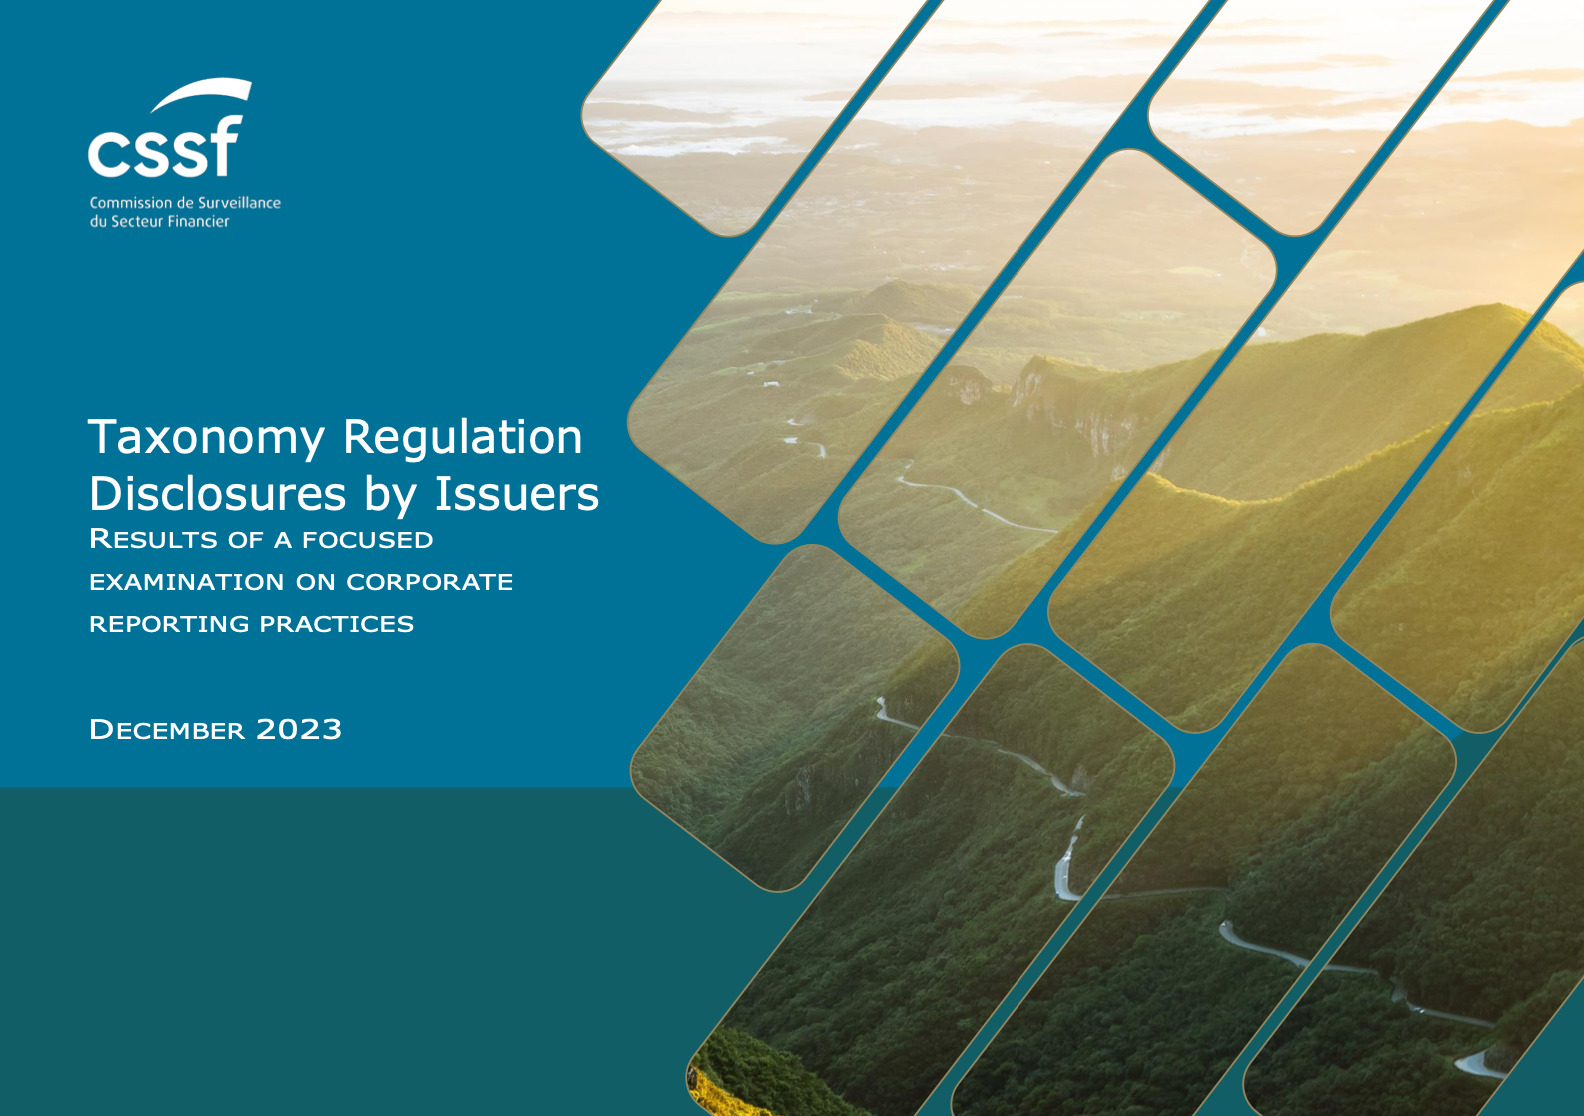 CSSF publishes report on Taxonomy Regulation Disclosures by Issuers